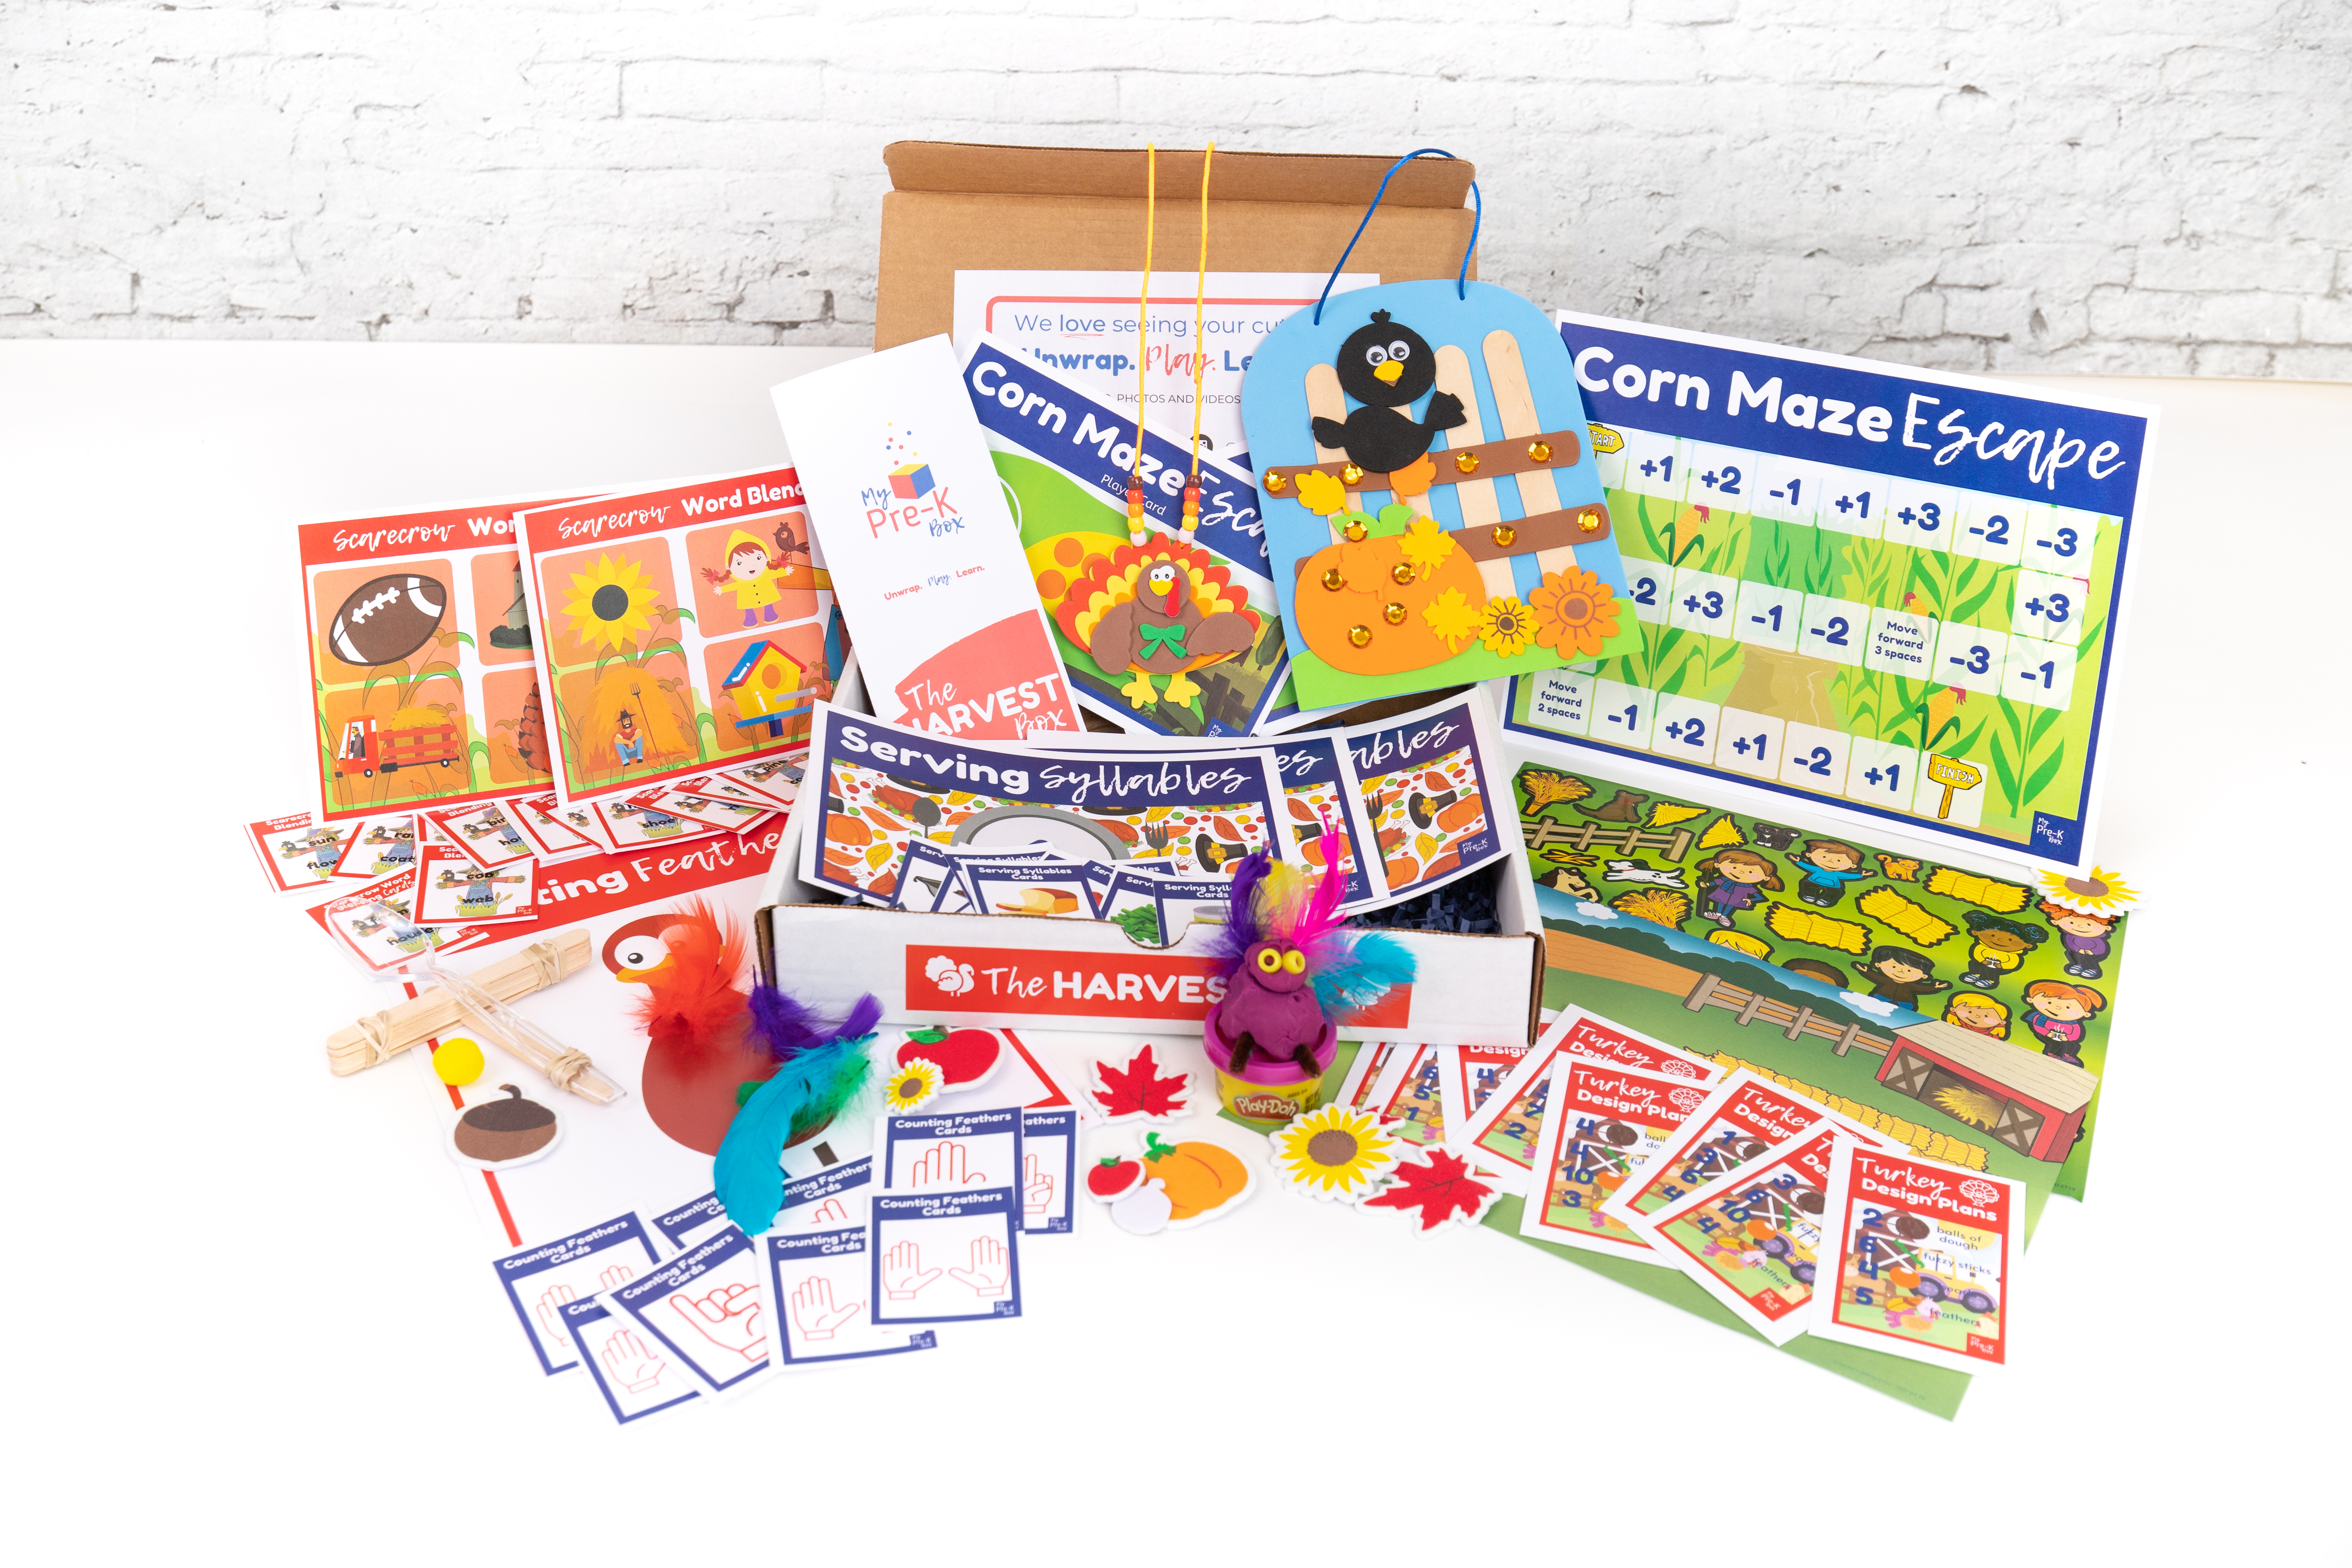 preschool learning activities and crafts - hands-on learning for preschoolers